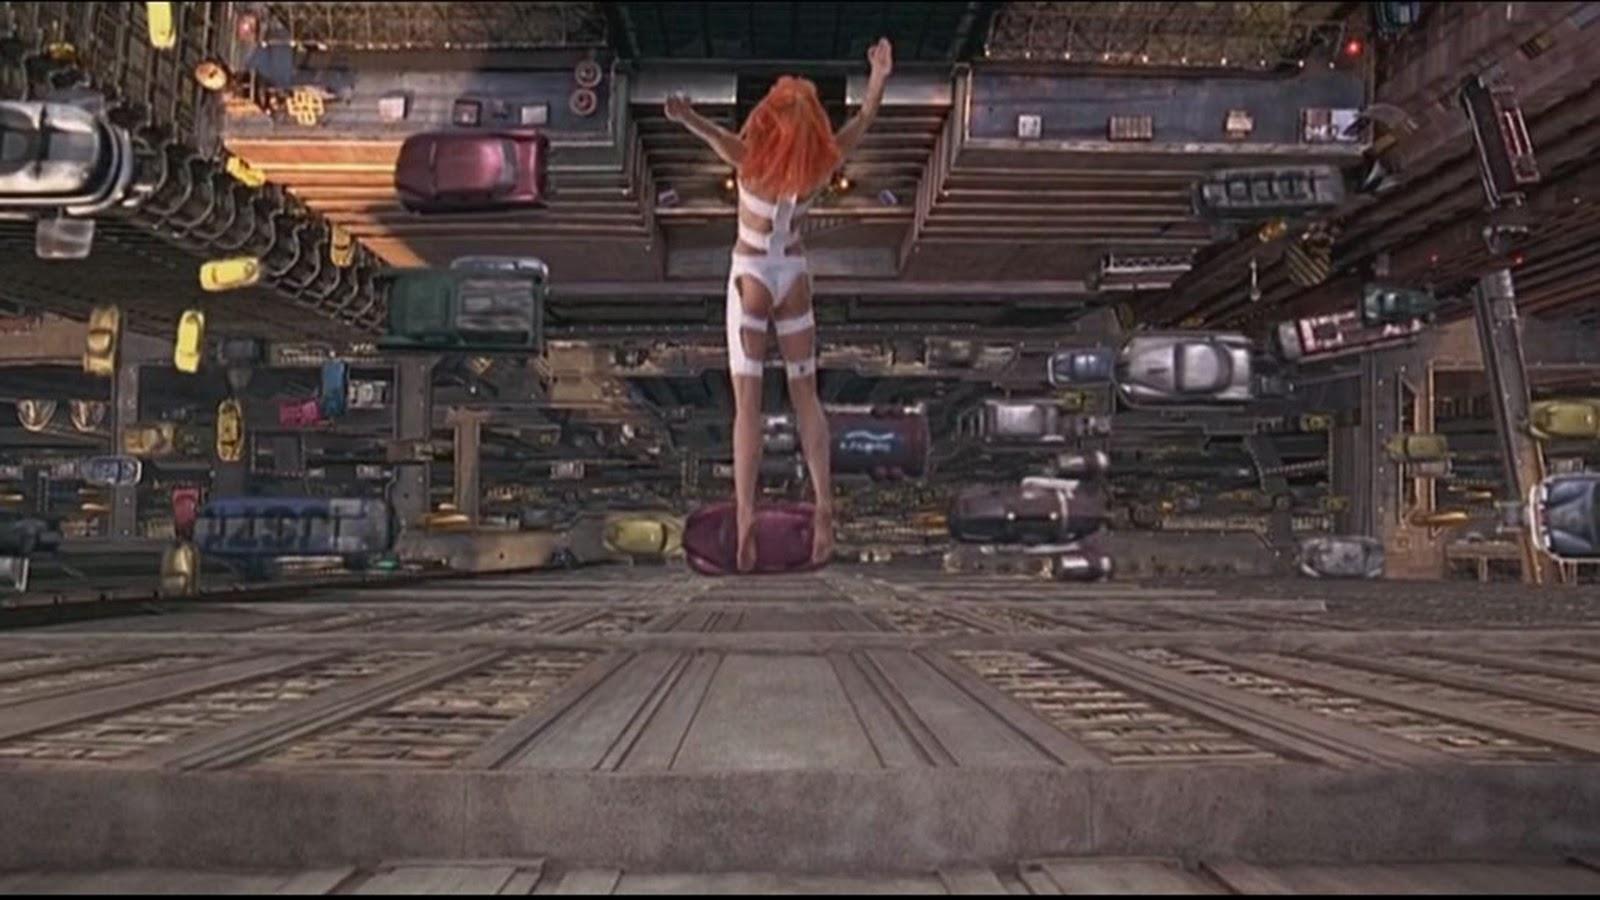 The Fifth Element: Plot